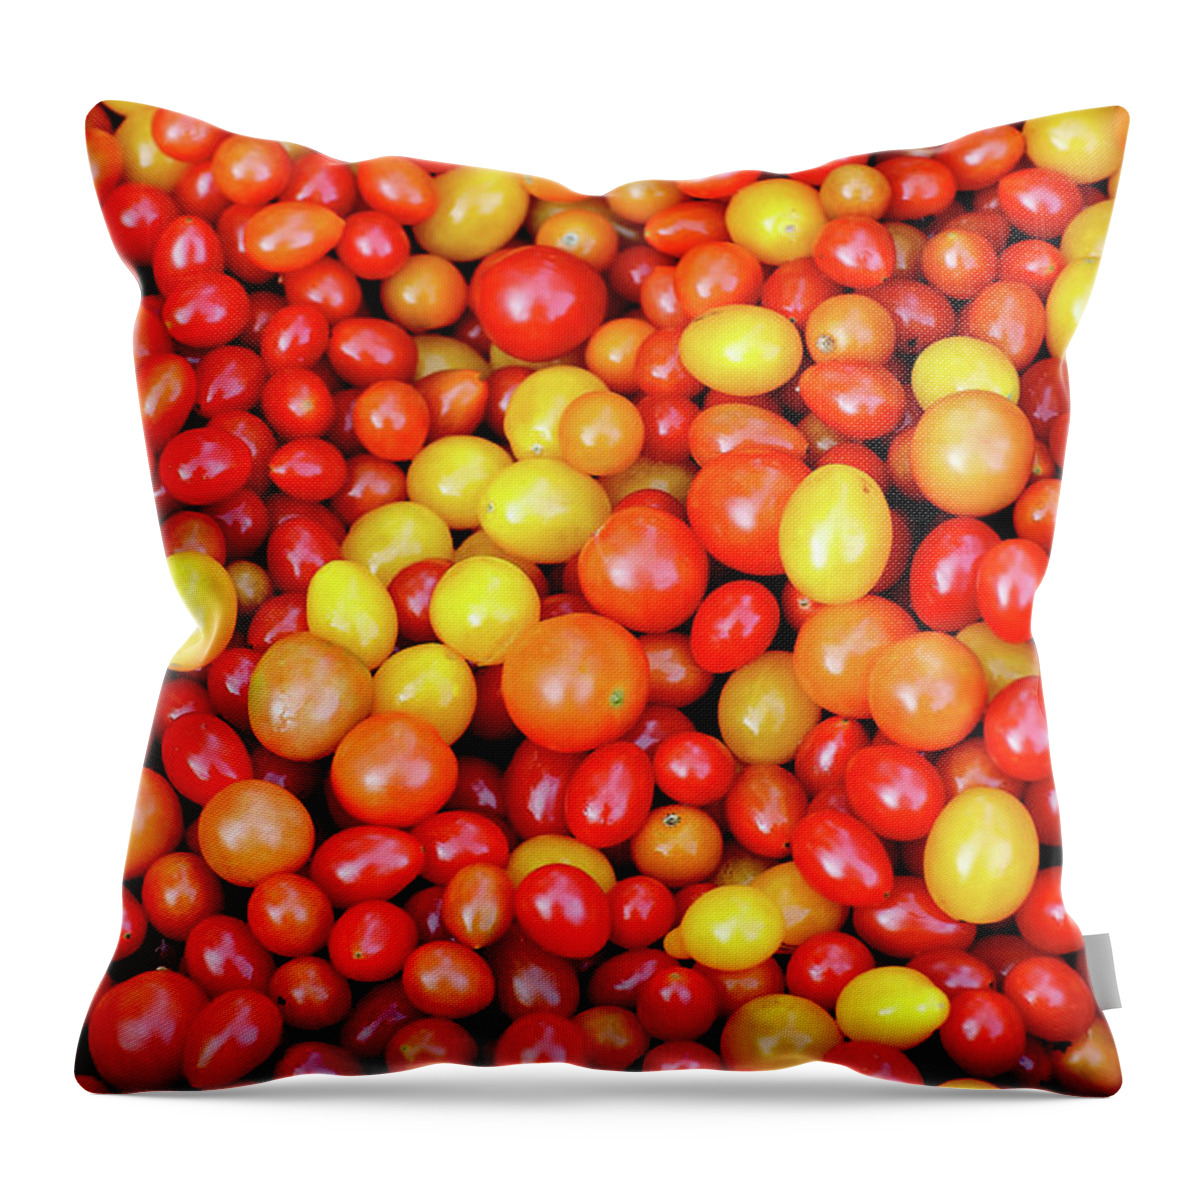 Tomatoes Throw Pillow featuring the photograph Tiny Tomatoes by Todd Klassy